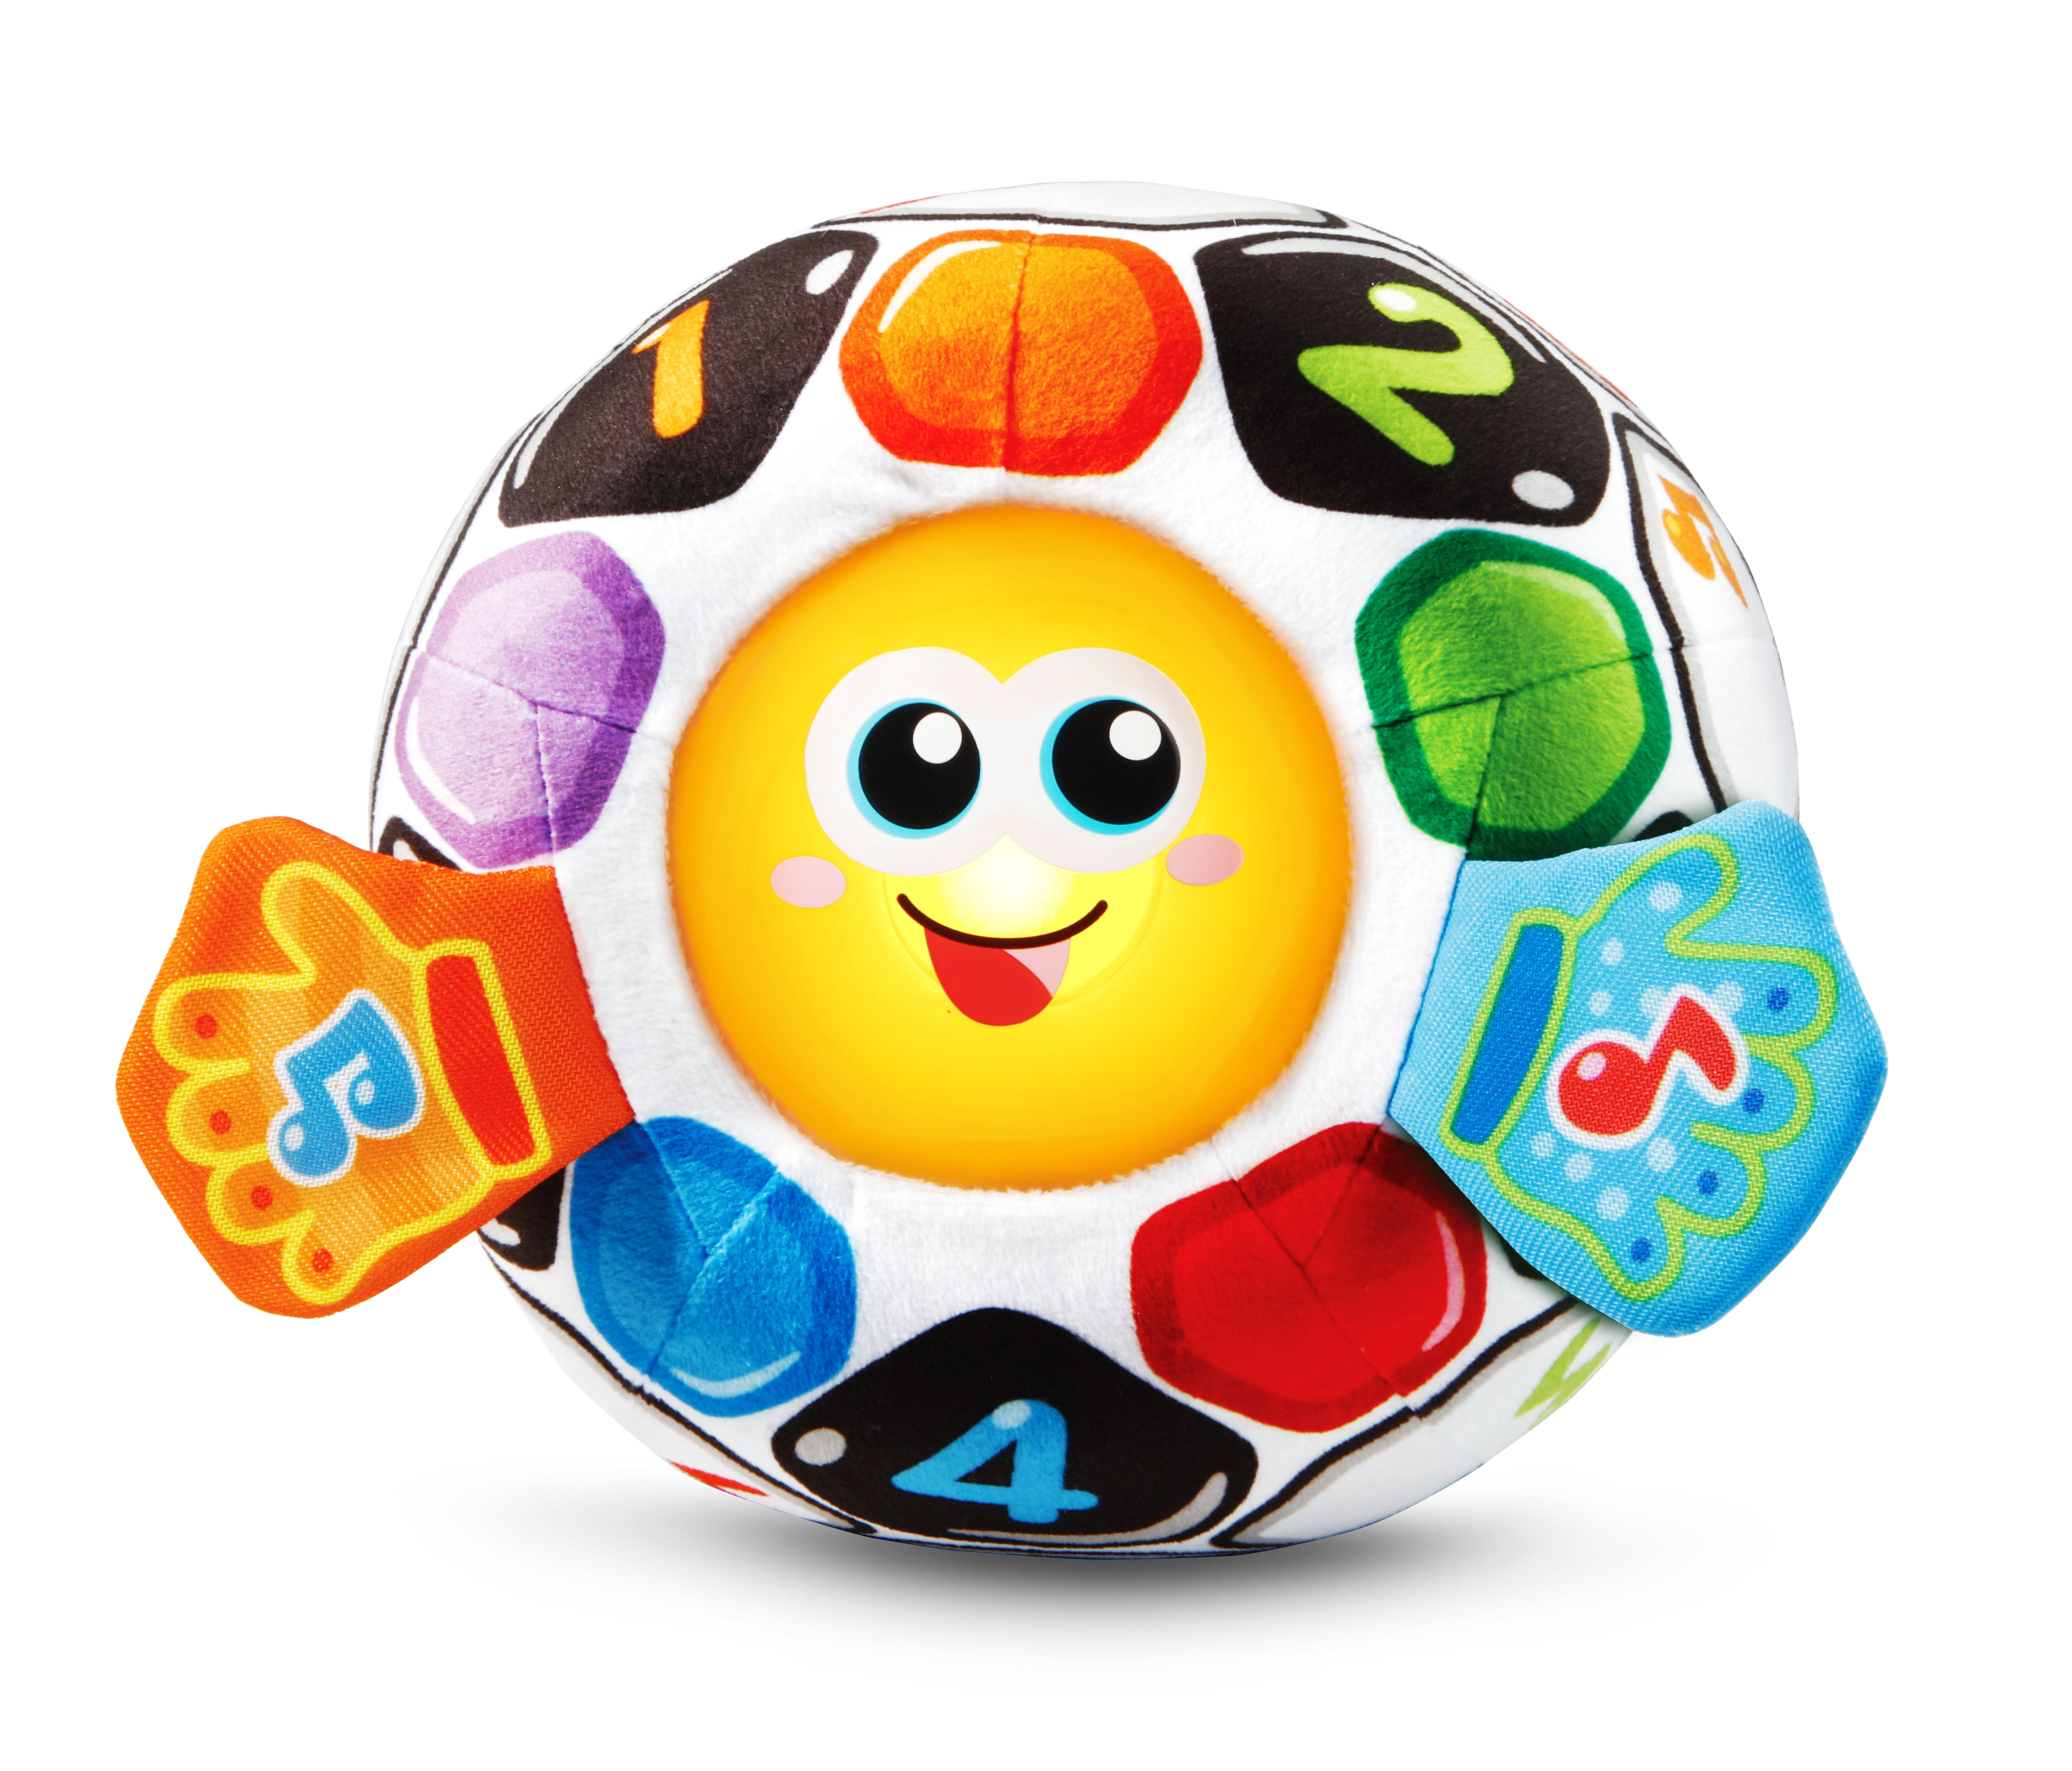 VTech, Bright Lights Soccer Ball, Ball Toy, Toddler Toy